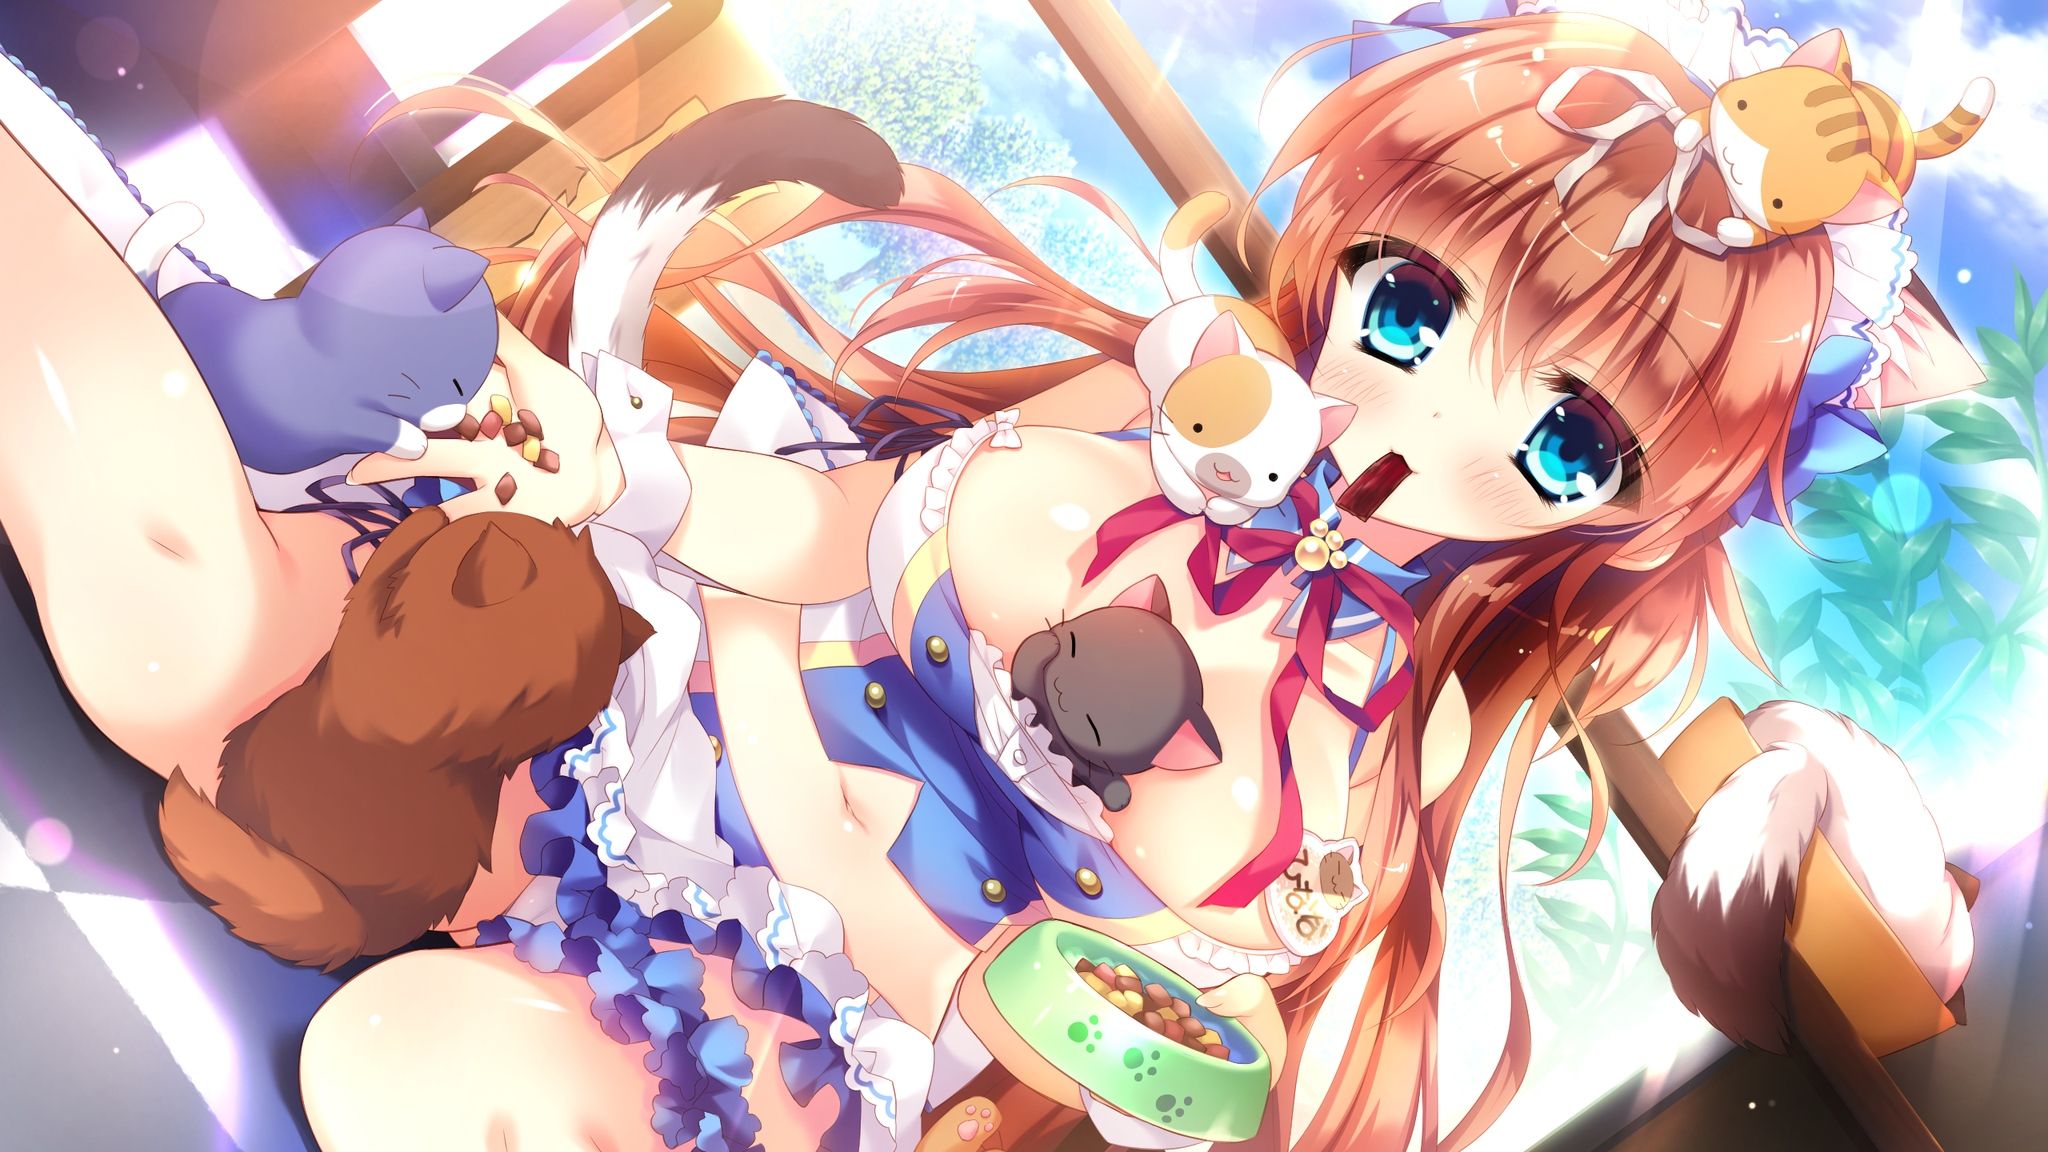 Dalmatians in Nya I'm ☆ served ALA mode! [PC18 forbidden eroge HCG] erotic wallpapers and pictures part 2 2